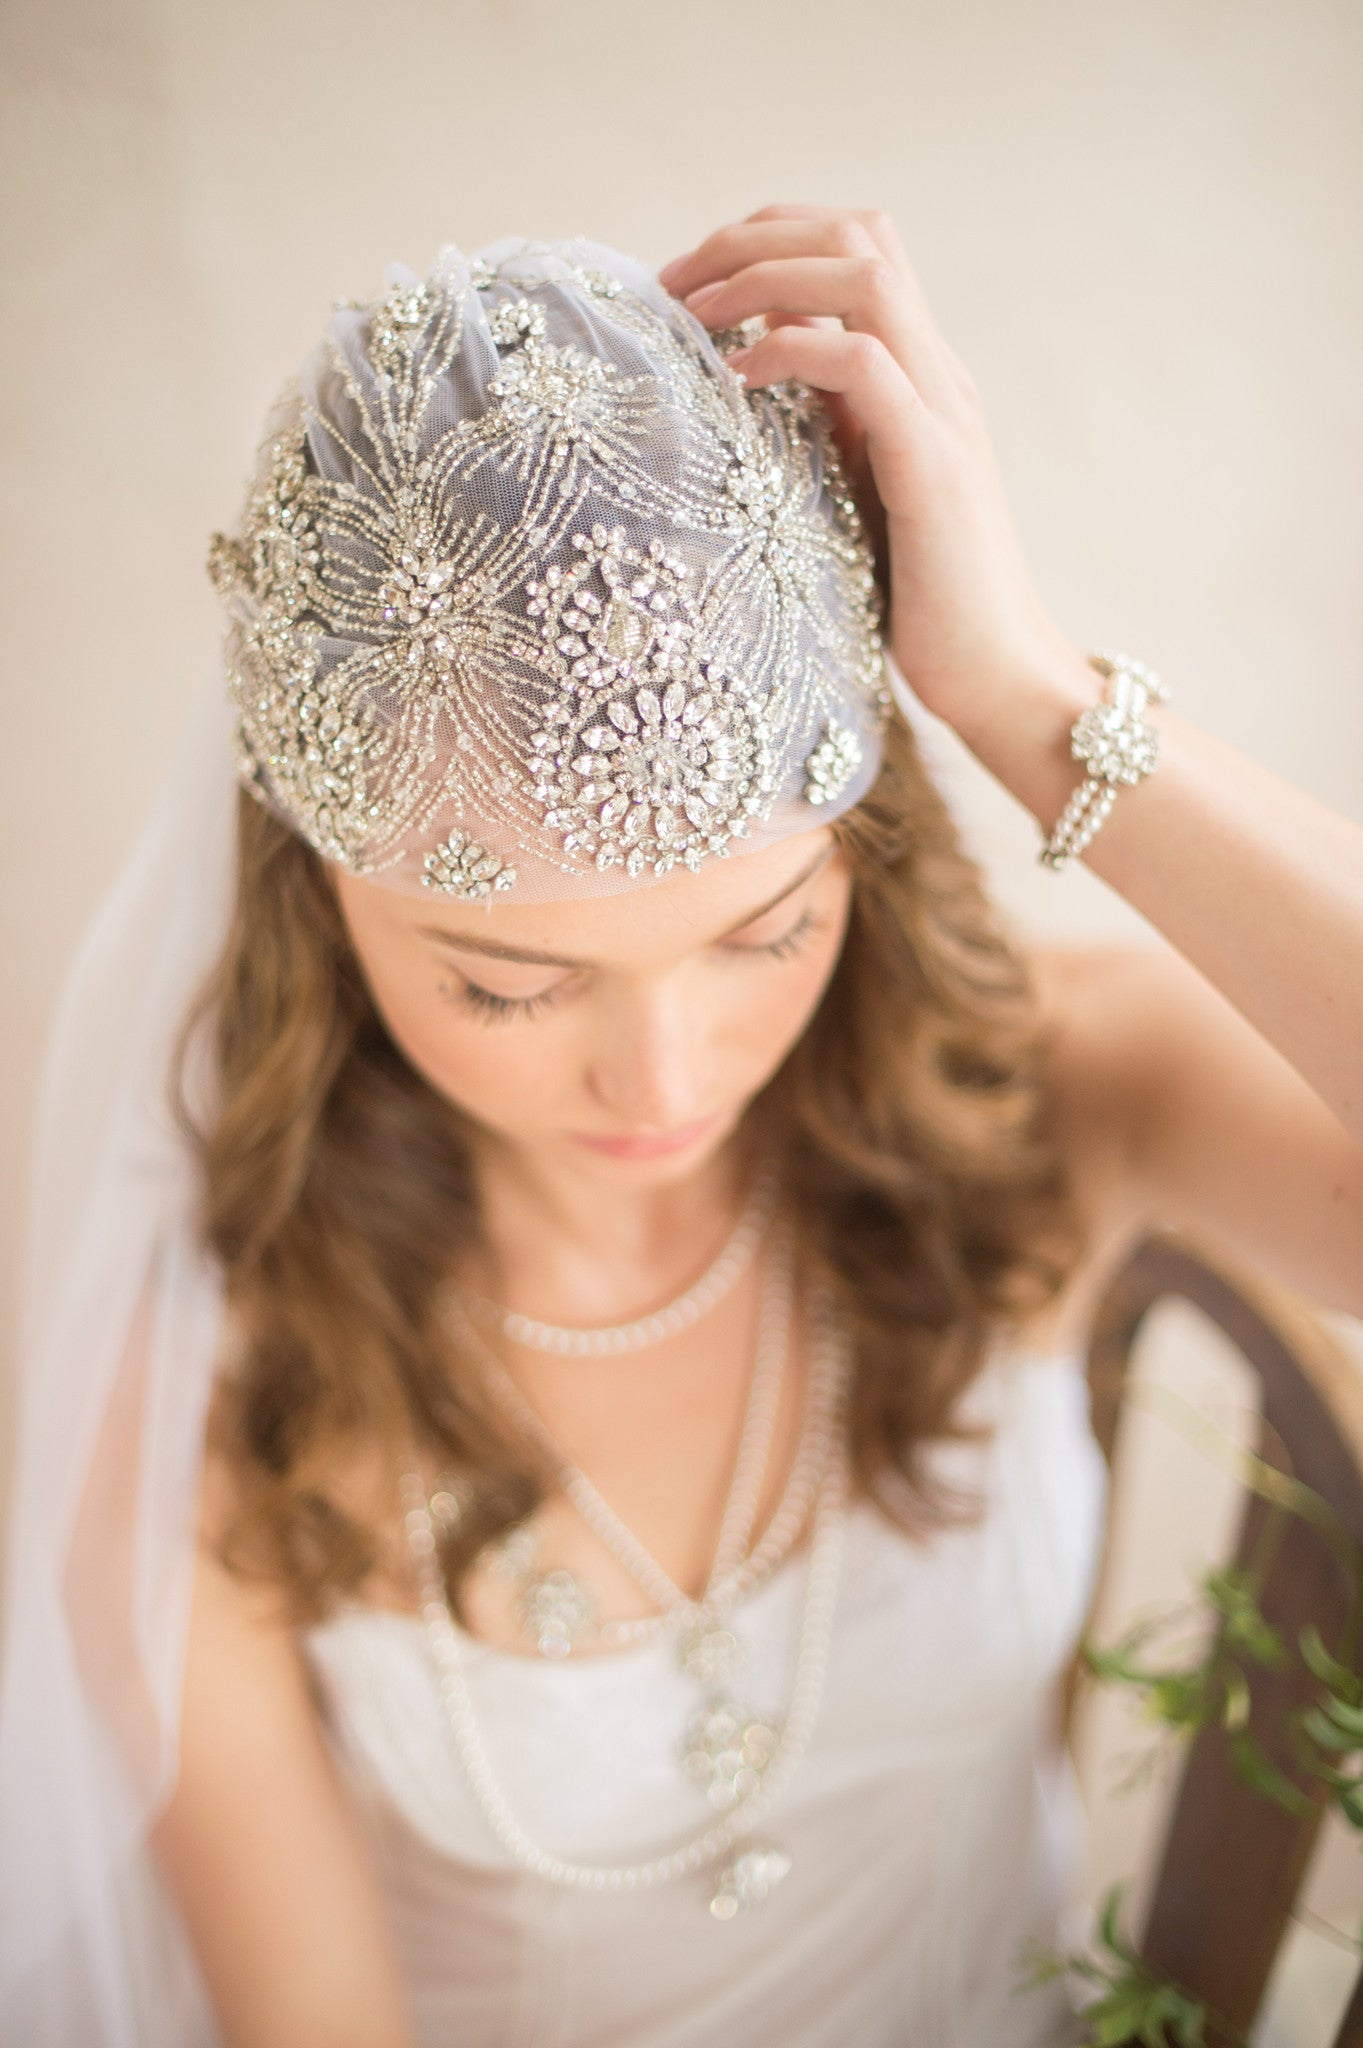 Juliet Cap Wedding Veil Beaded Bridal Veil Art Deco Headpiece Crystal Embellished Veil Vintage Gatsby Hair Accessory Jeweled 1920s, DAISY VEIL for Her, for Bride, for Bridesmaid Gift , for Mother of the Bride, for Wedding Guest or Special Occasion by Camilla Christine Bridal Jewelry and Wedding Accessories. Bridal Style Inspiration Trends for Bride, Wedding Ideas